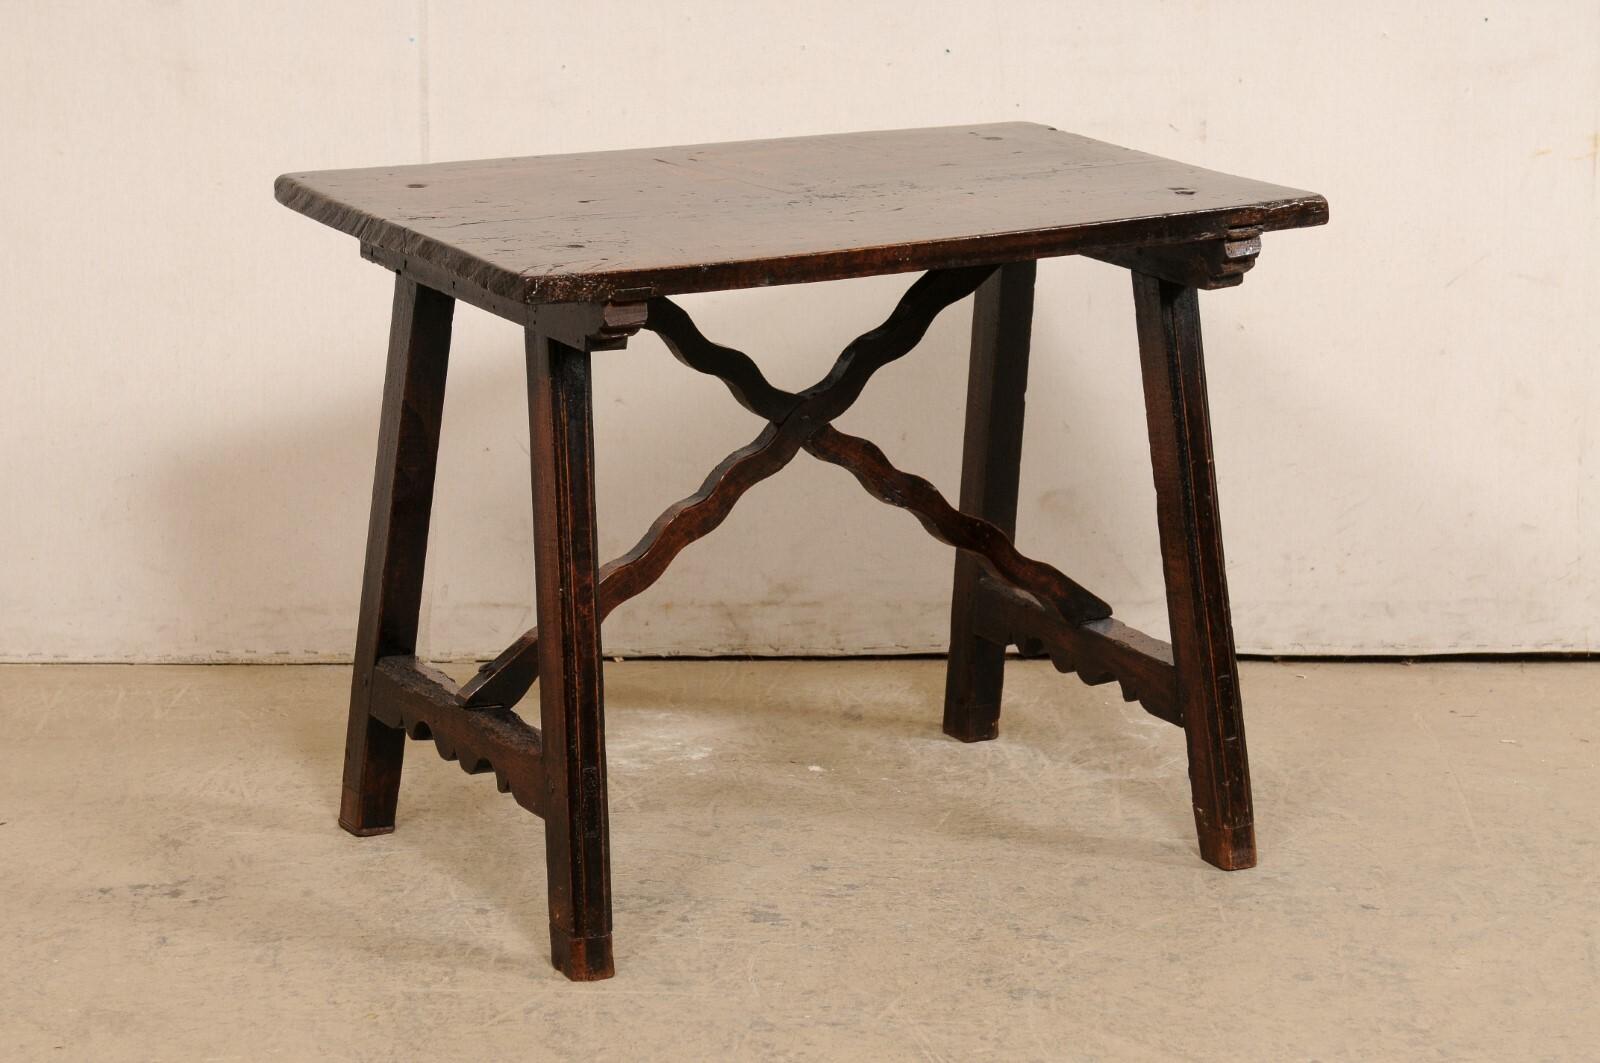 A Spanish carved-wood occasional table from the 18th century. This antique table from Spain has a rectangular-shaped and beautifully aged wood top, and raised upon a pair of saw-horse style trestle legs. The legs have a clean design, with side